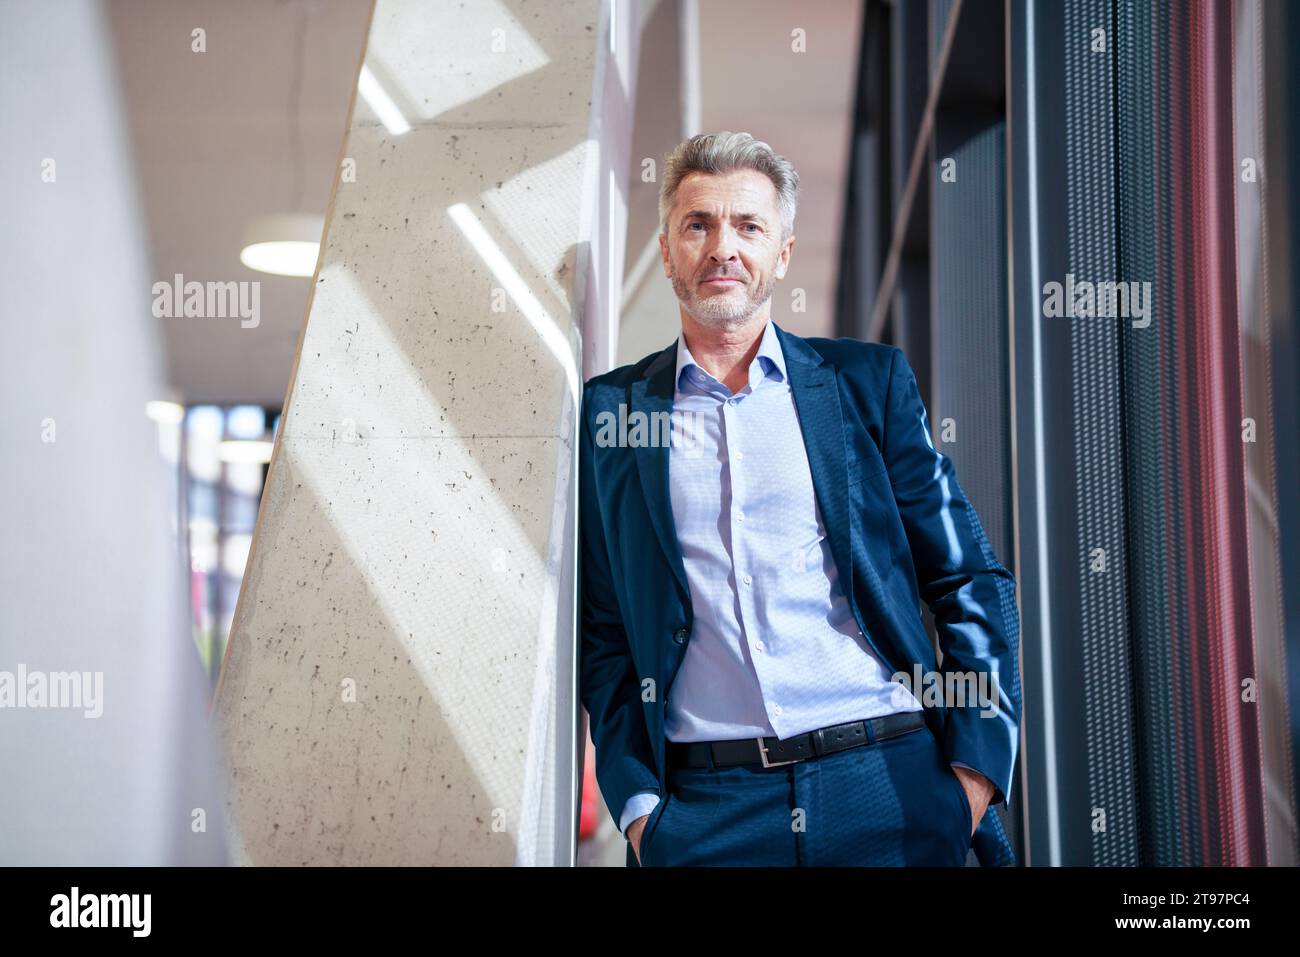 Mature businessman with hands in pockets standing near column Stock Photo